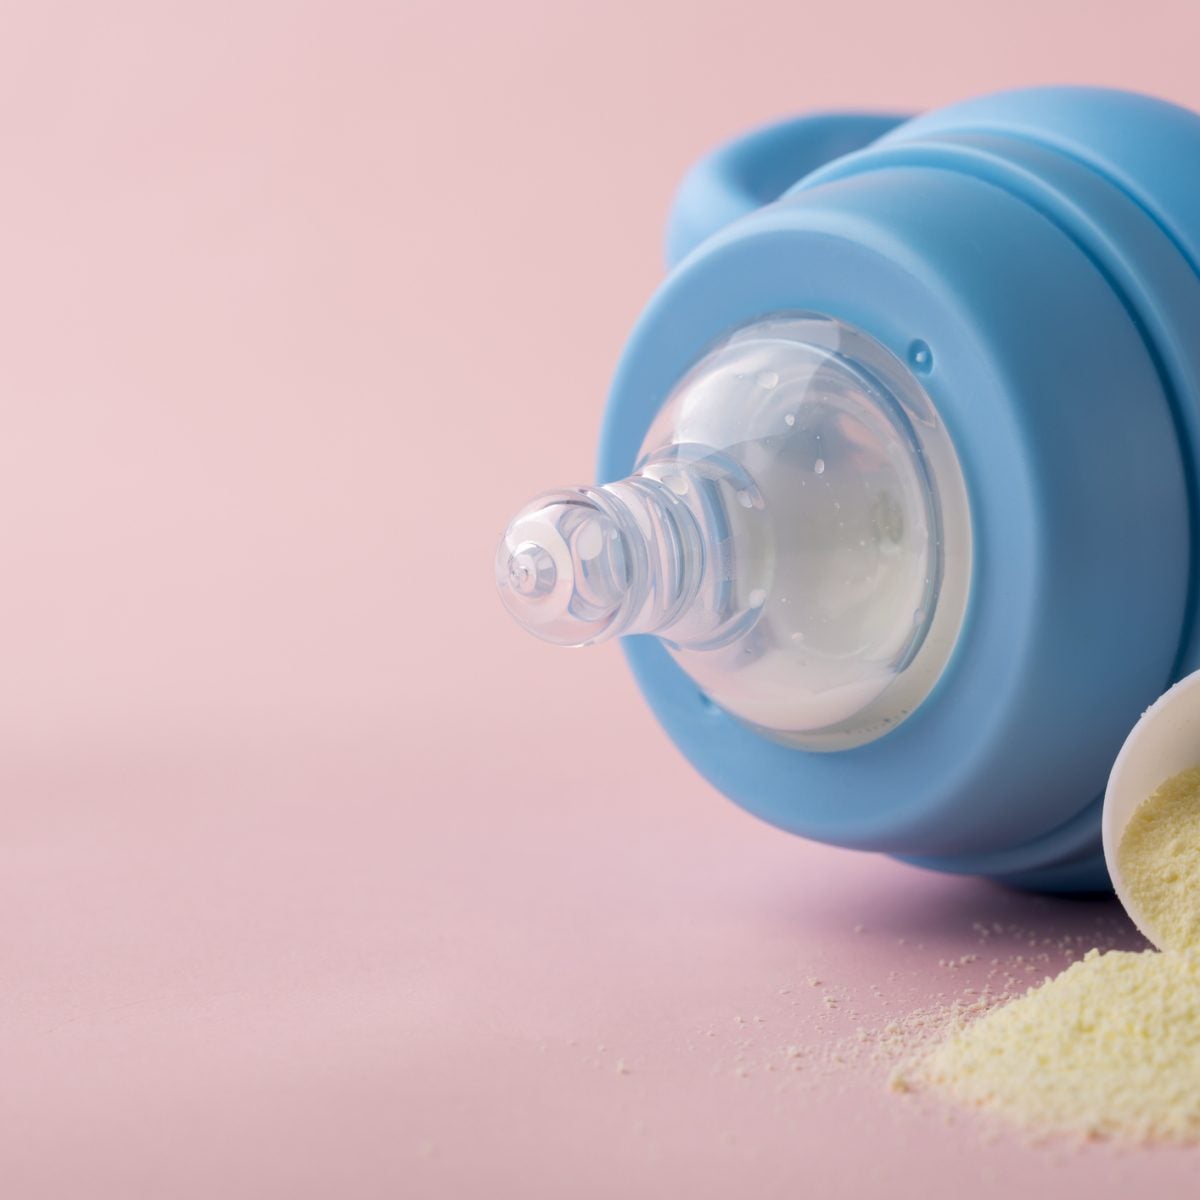 Powdered Infant Formula From Three Popular Brands Recalled As FDA Investigates Complaints Of Bacterial Infections